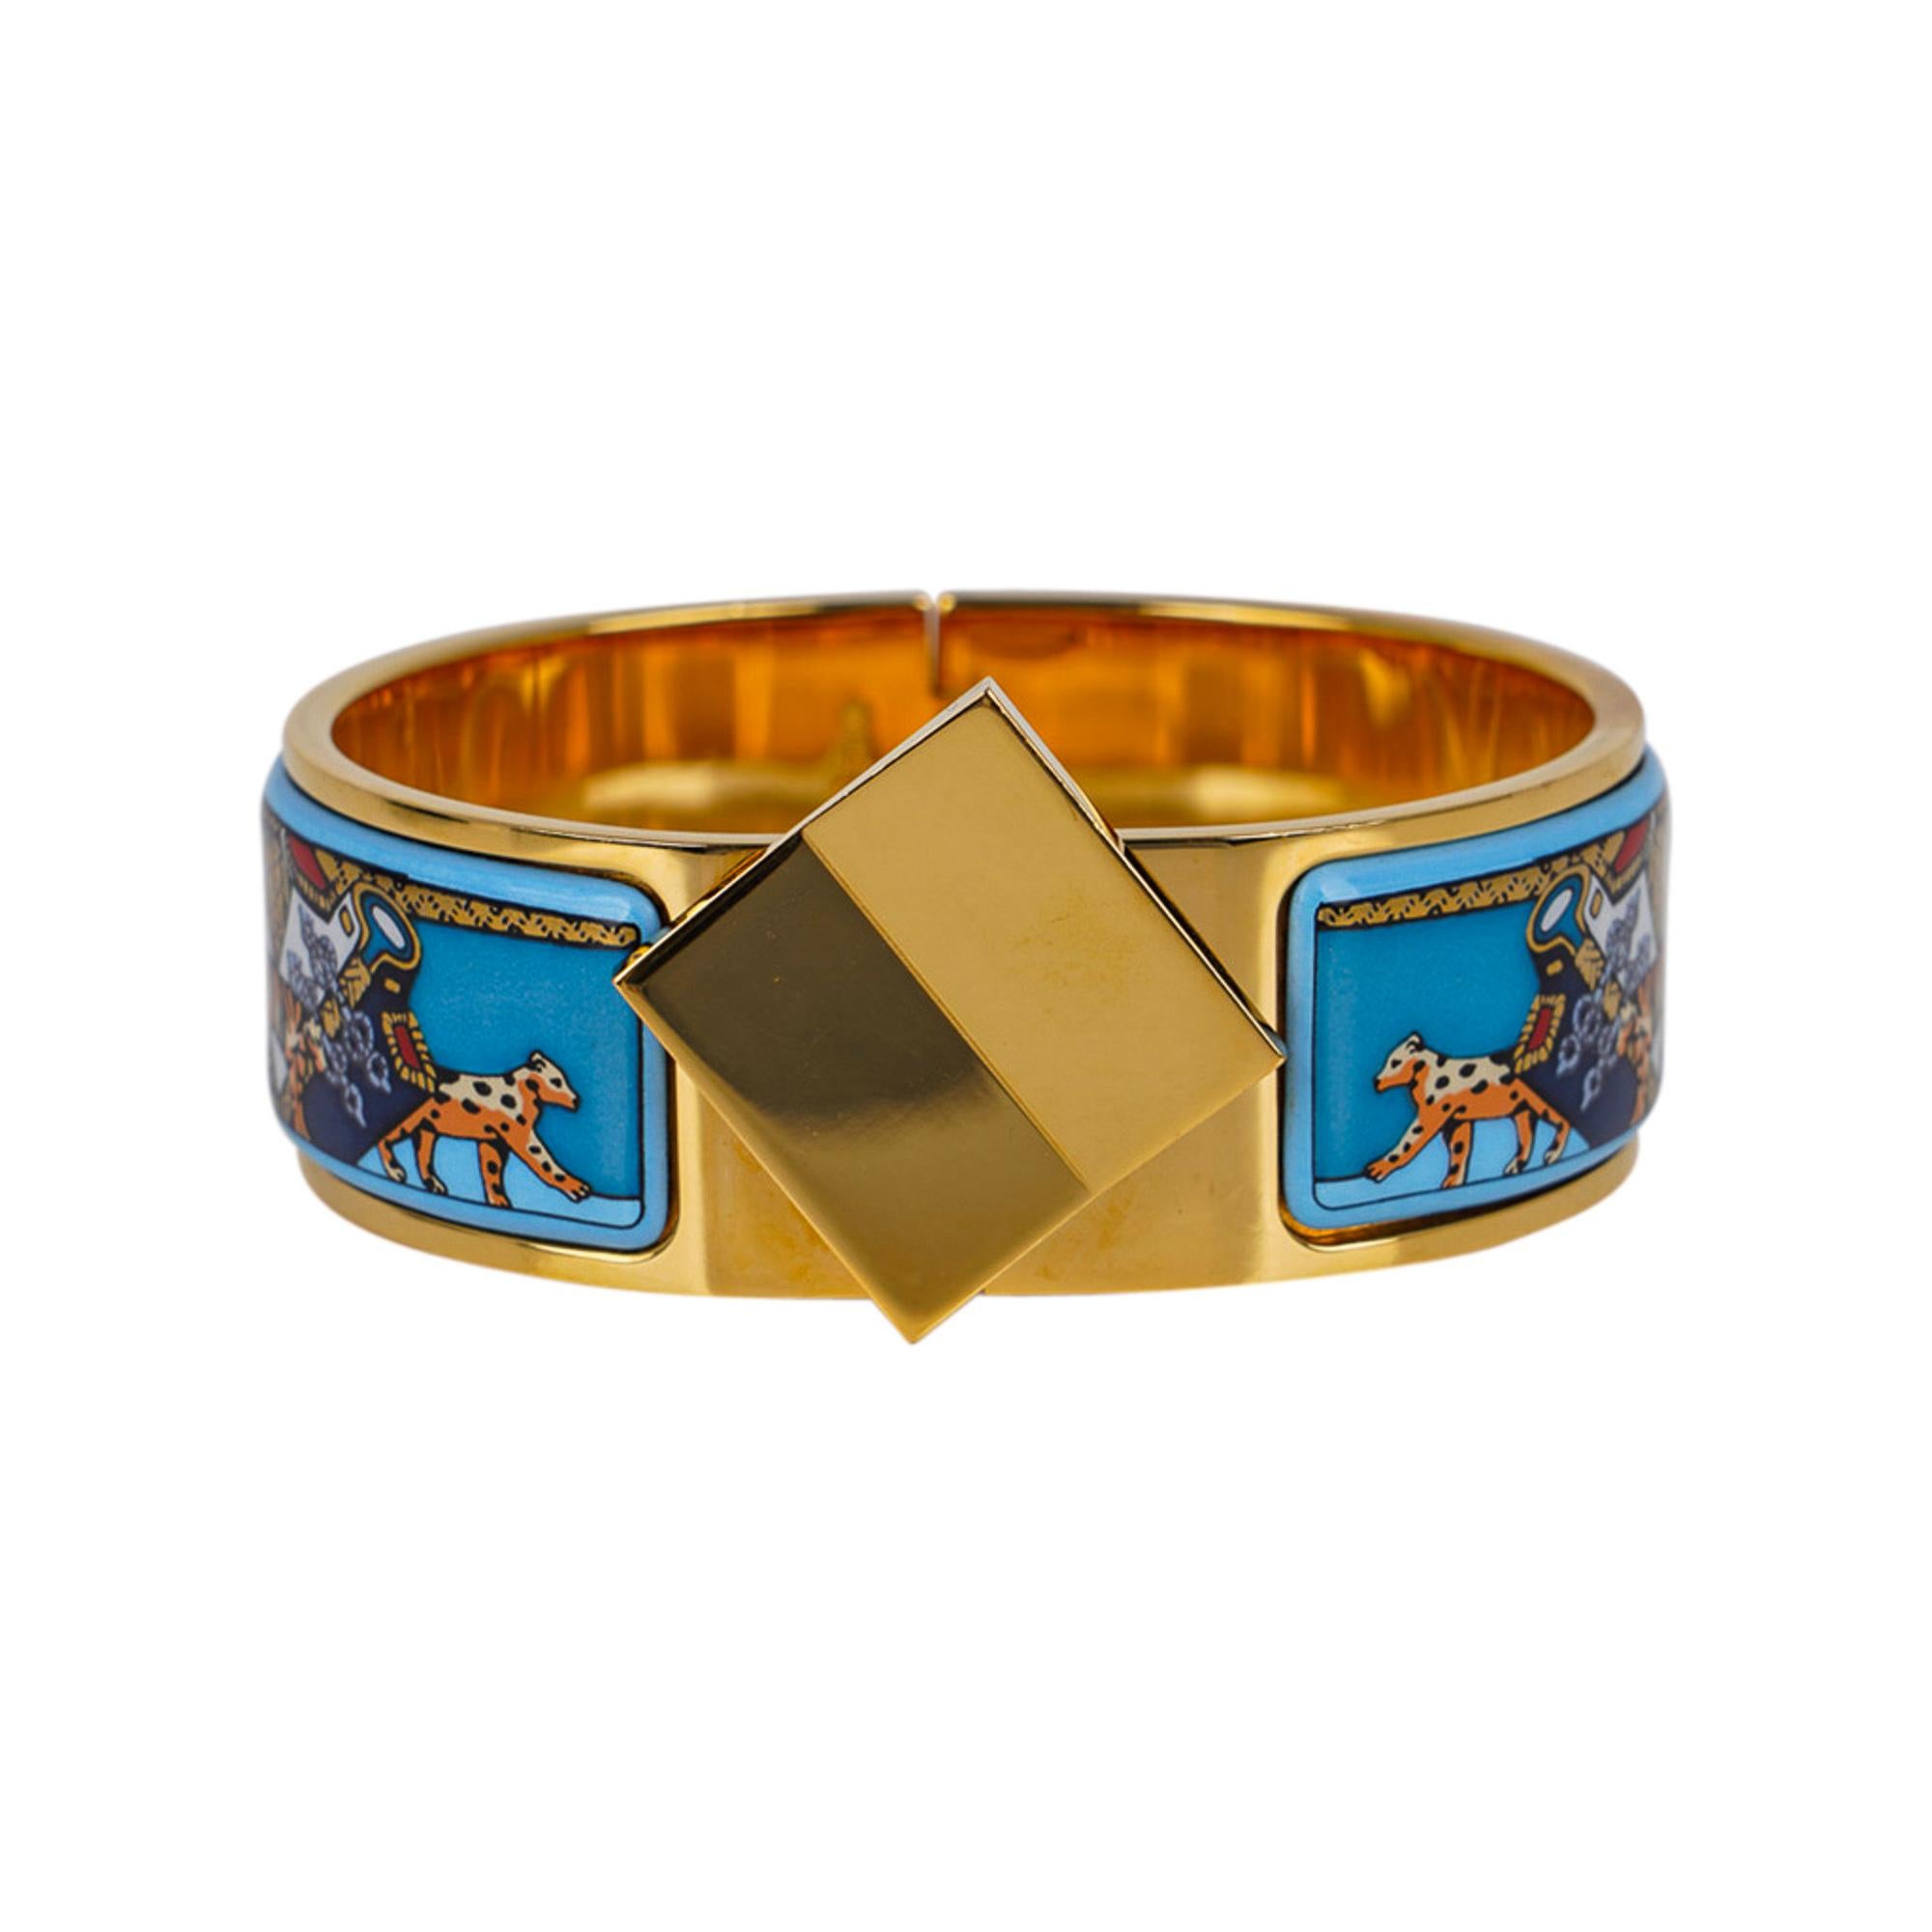 Mightychic offers a guaranteed authentic Hermes Vintage Snow Leopards Enamel Clic Clac bracelet 65 PM.
This stunning rare Hermes bracelet is a collectors find.
Depicting snow leopards and a tiger on a bright blue background with gold plated